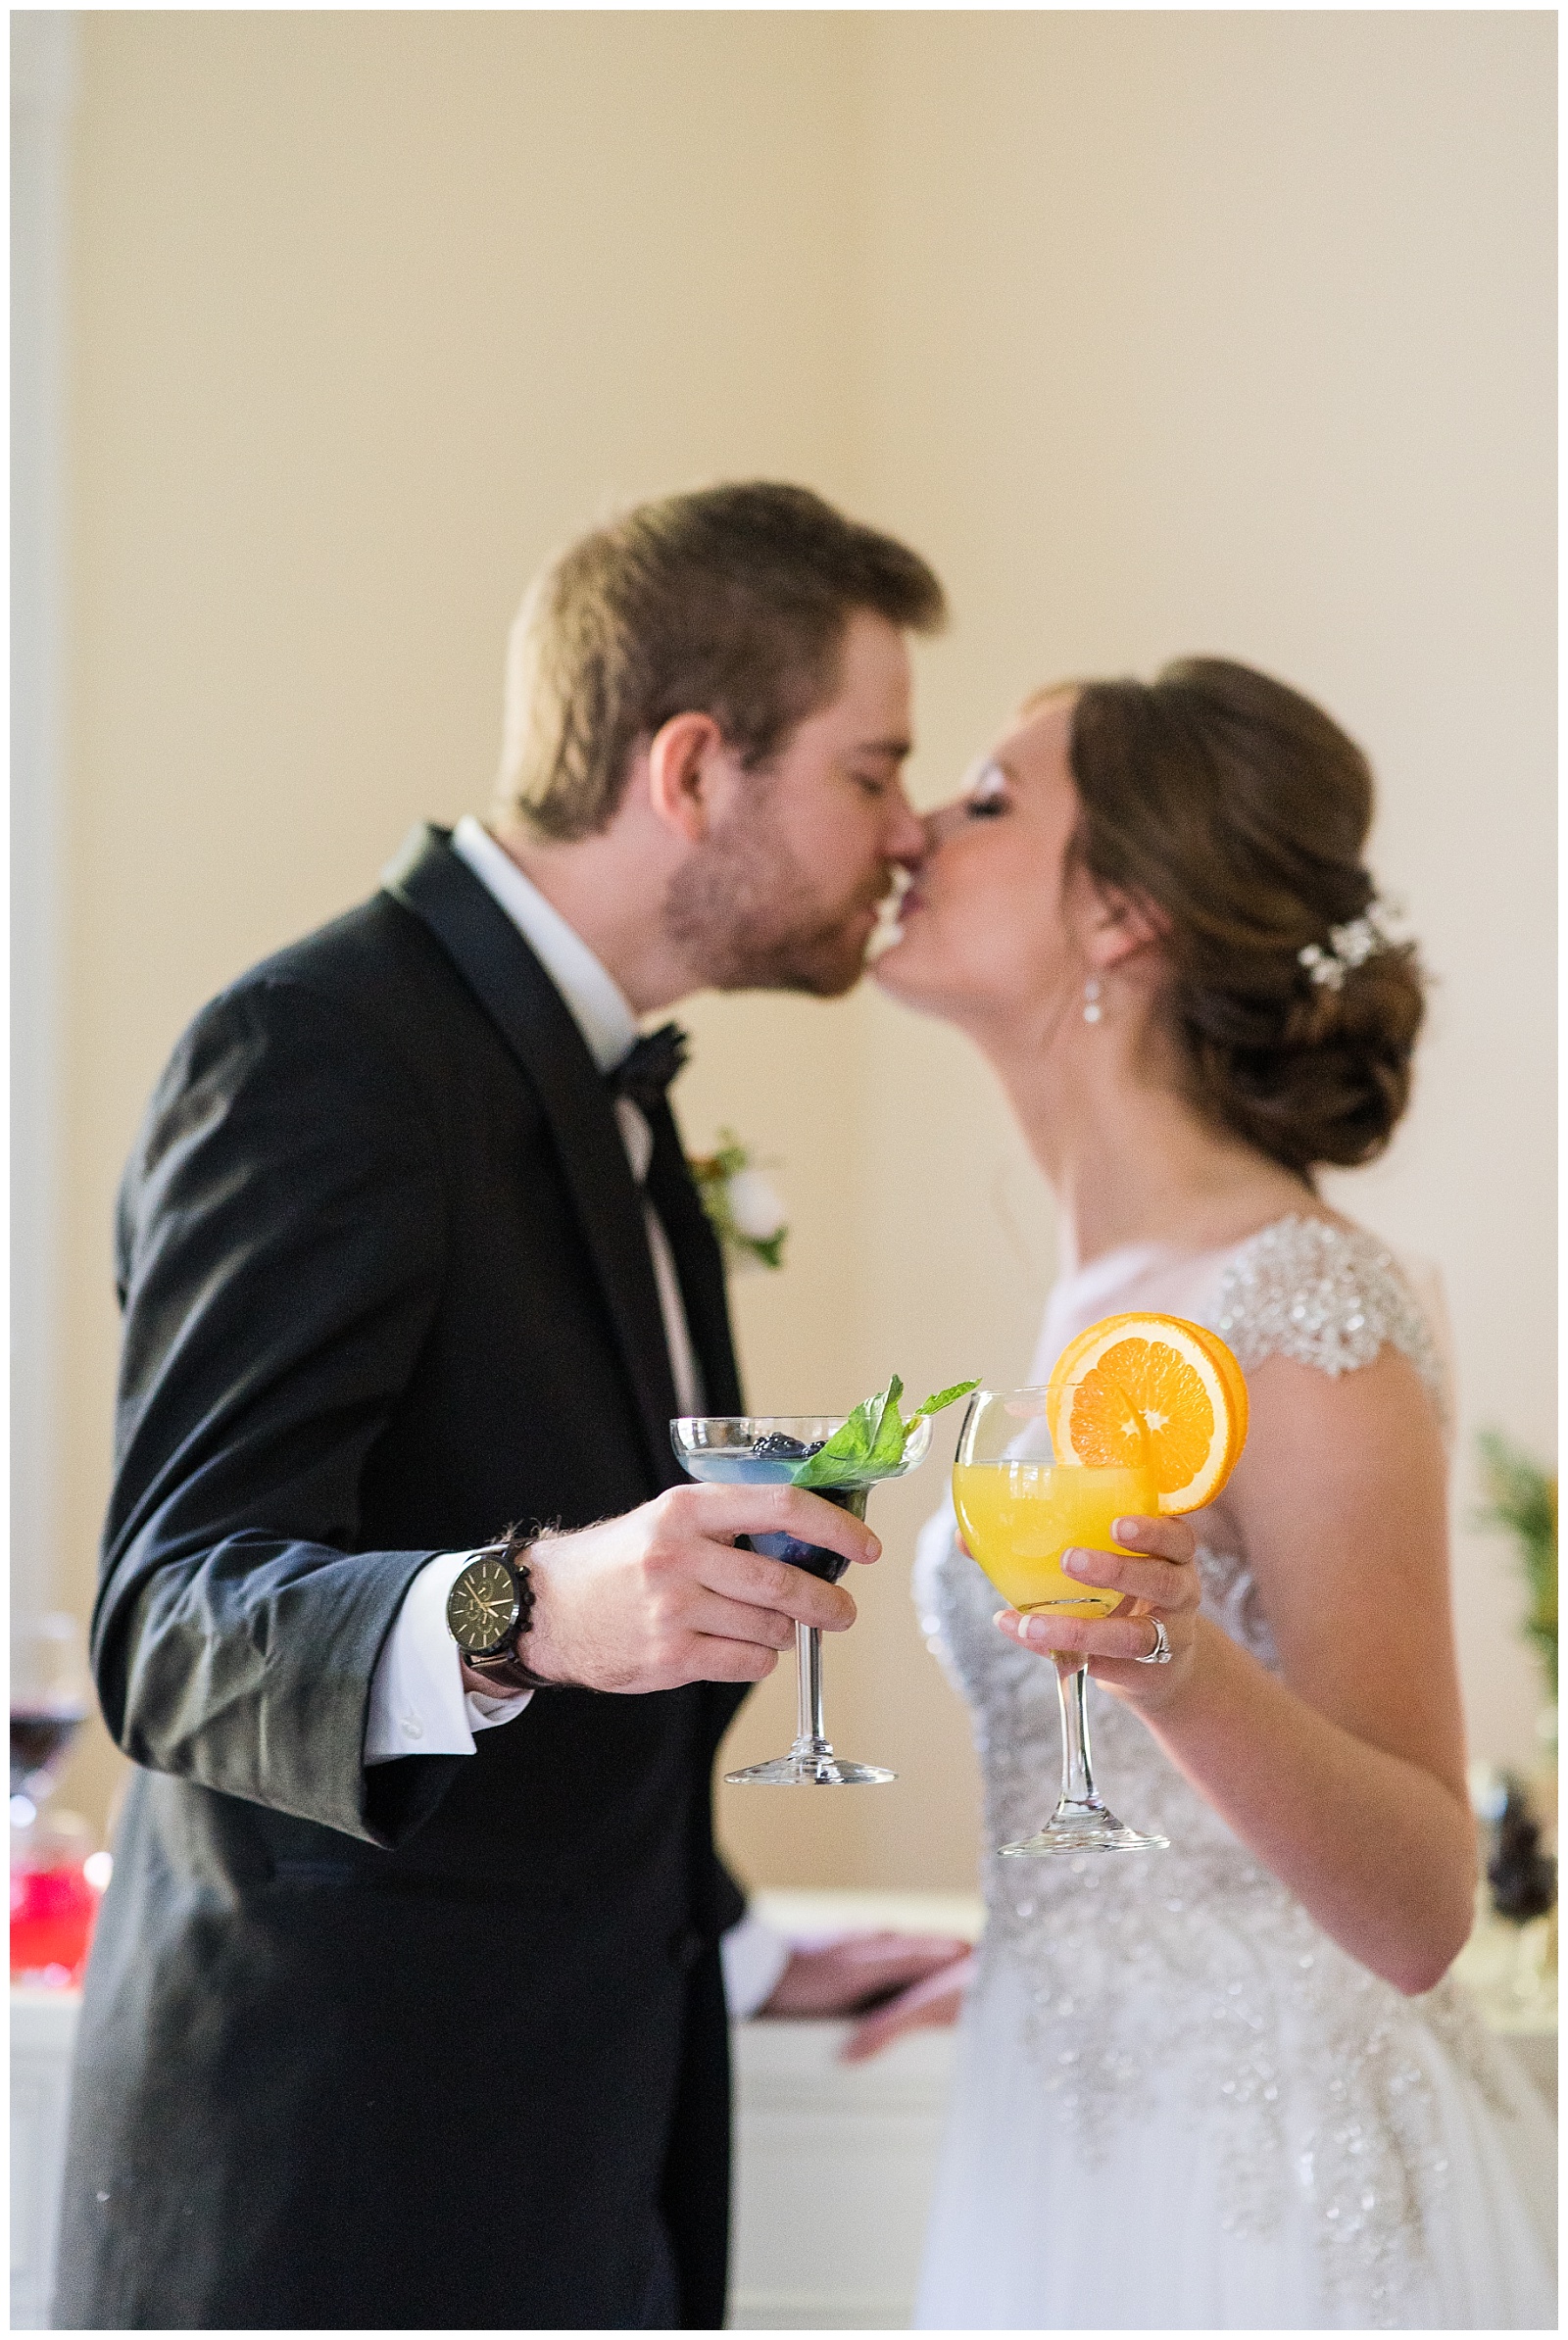 couple share a kiss and clink glasses containing colorful signature cocktails during small wedding toast